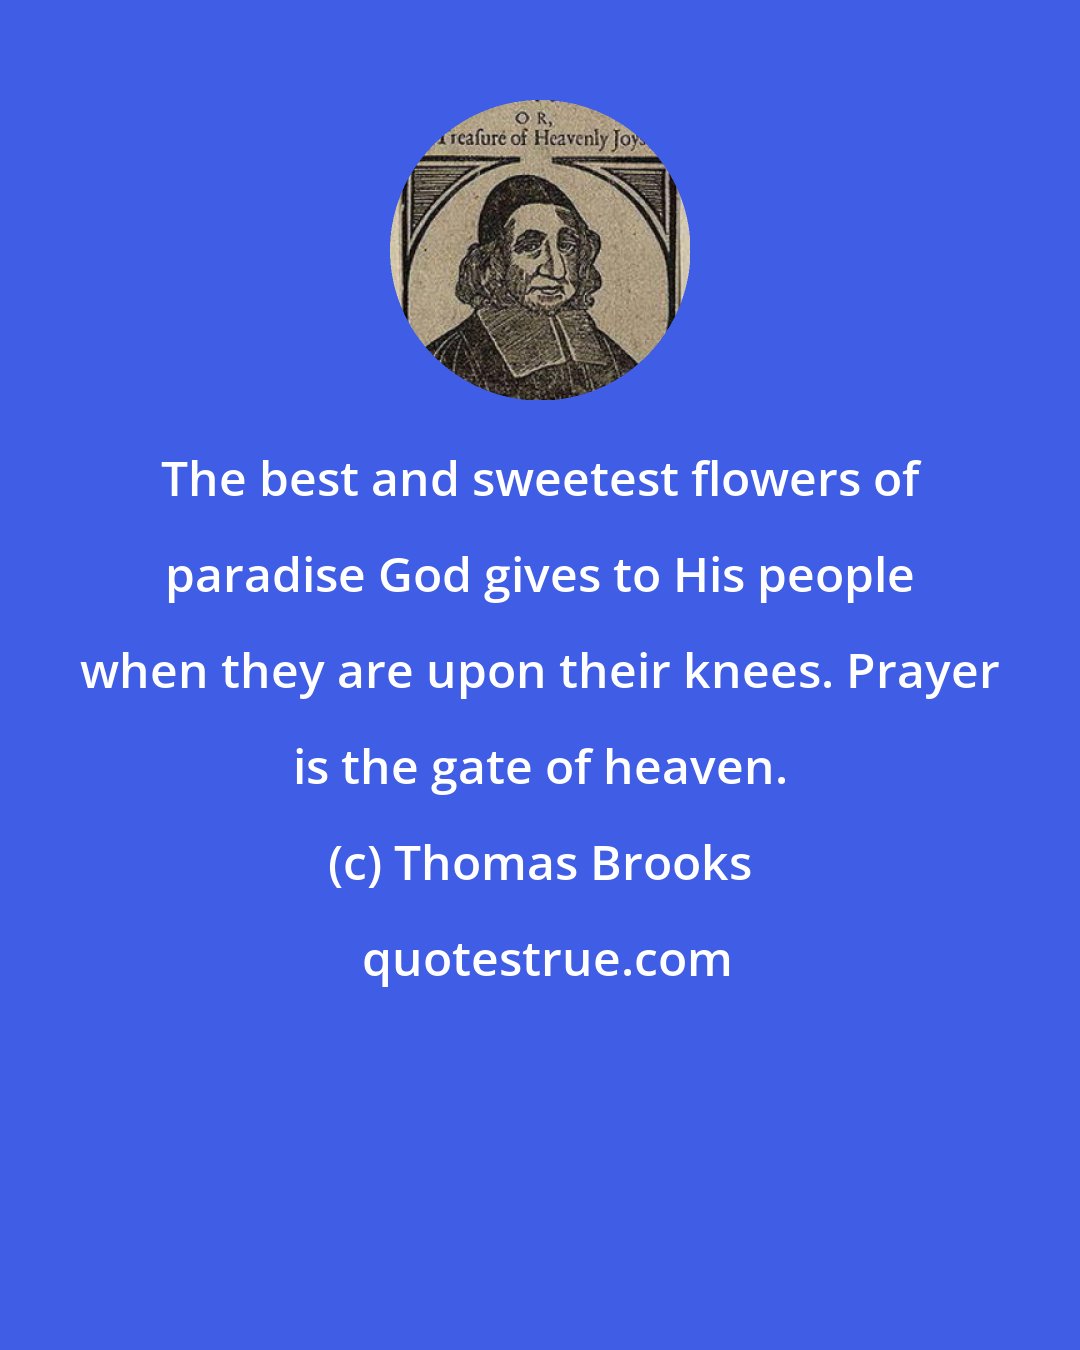 Thomas Brooks: The best and sweetest flowers of paradise God gives to His people when they are upon their knees. Prayer is the gate of heaven.